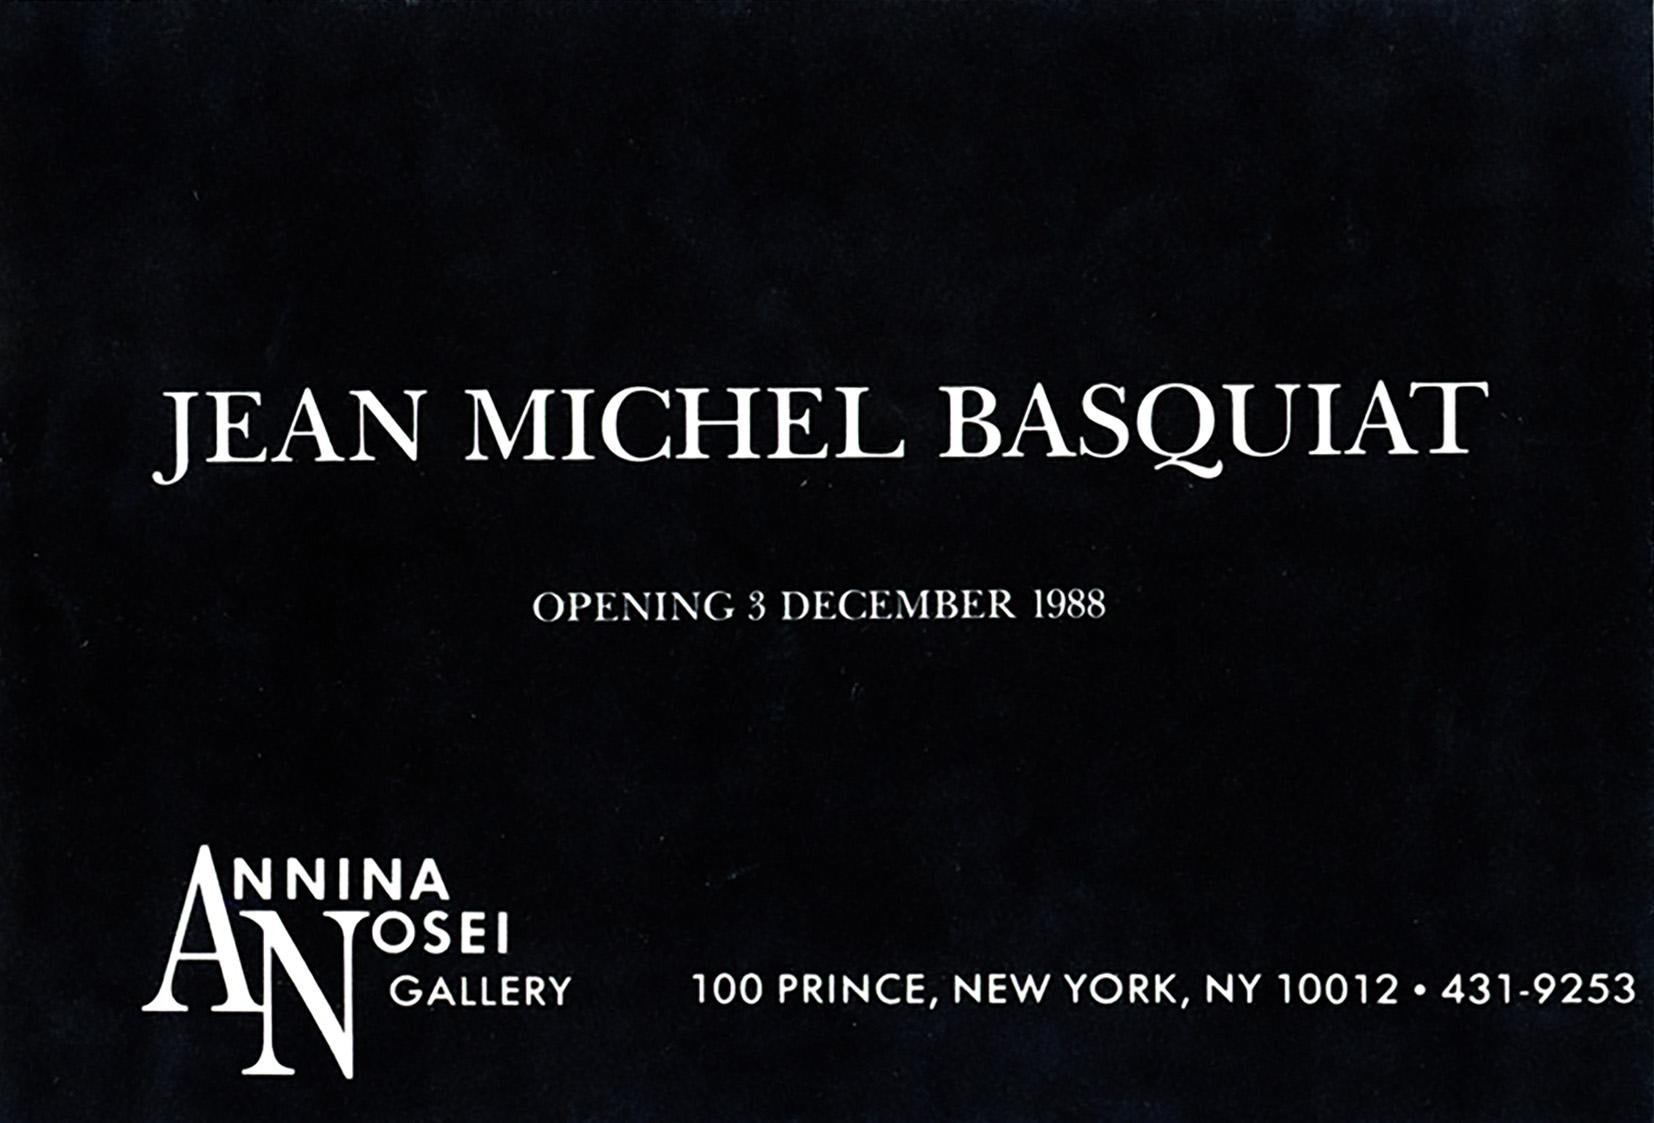 Jean-Michel Basquiat, Annina Nosei Gallery, New York, 1982-1988:
A set of 3 rare vintage original Basquiat announcement cards from 1982, 1986, 1988, respectively & one exhibition catalog (1985) - published on the occasion(s) of:  

- ‘Basquiat